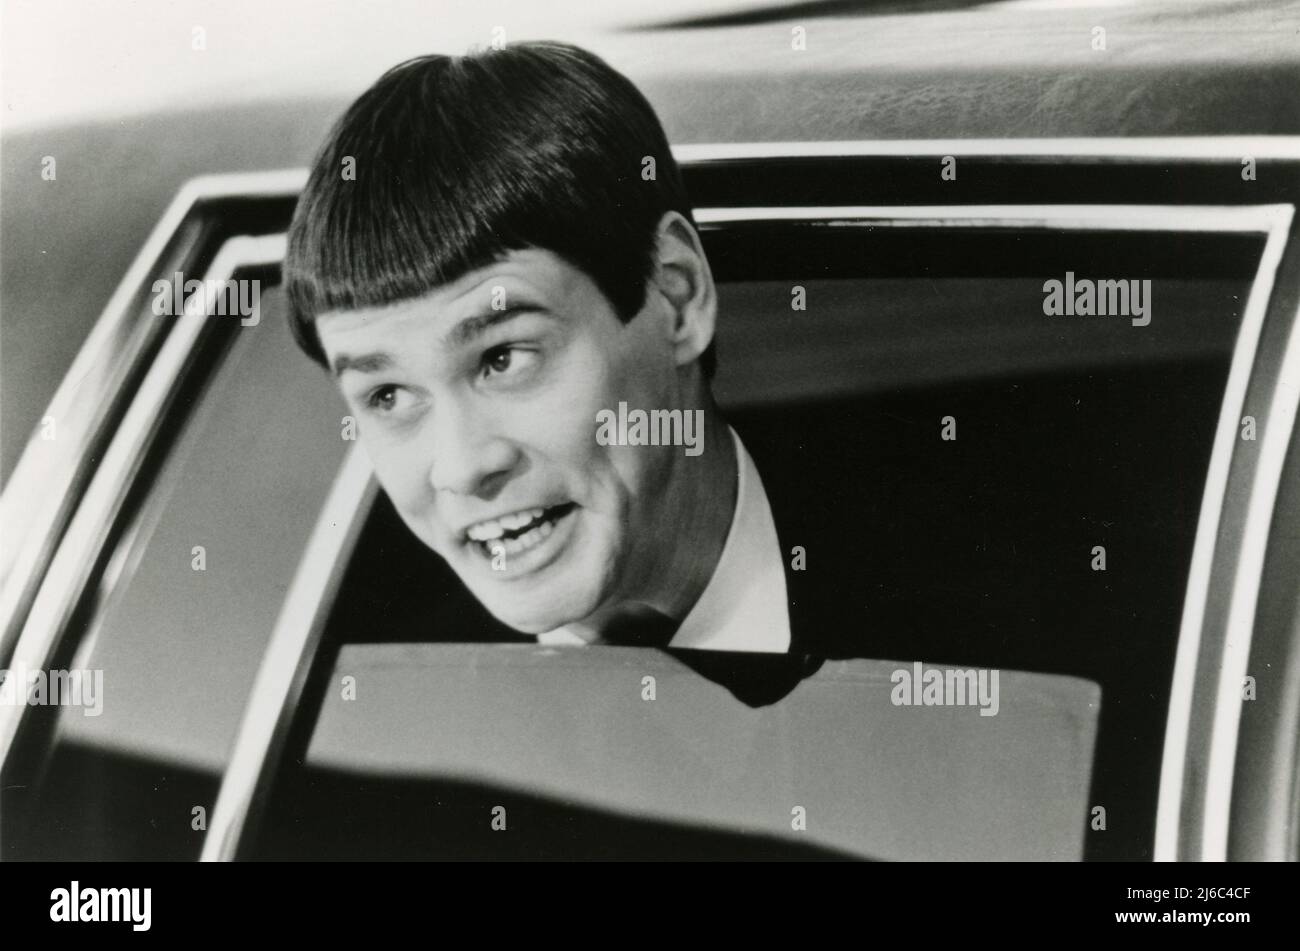 American actor Jim Carrey in the movie Dumb & Dumber, USA 1994 Stock Photo